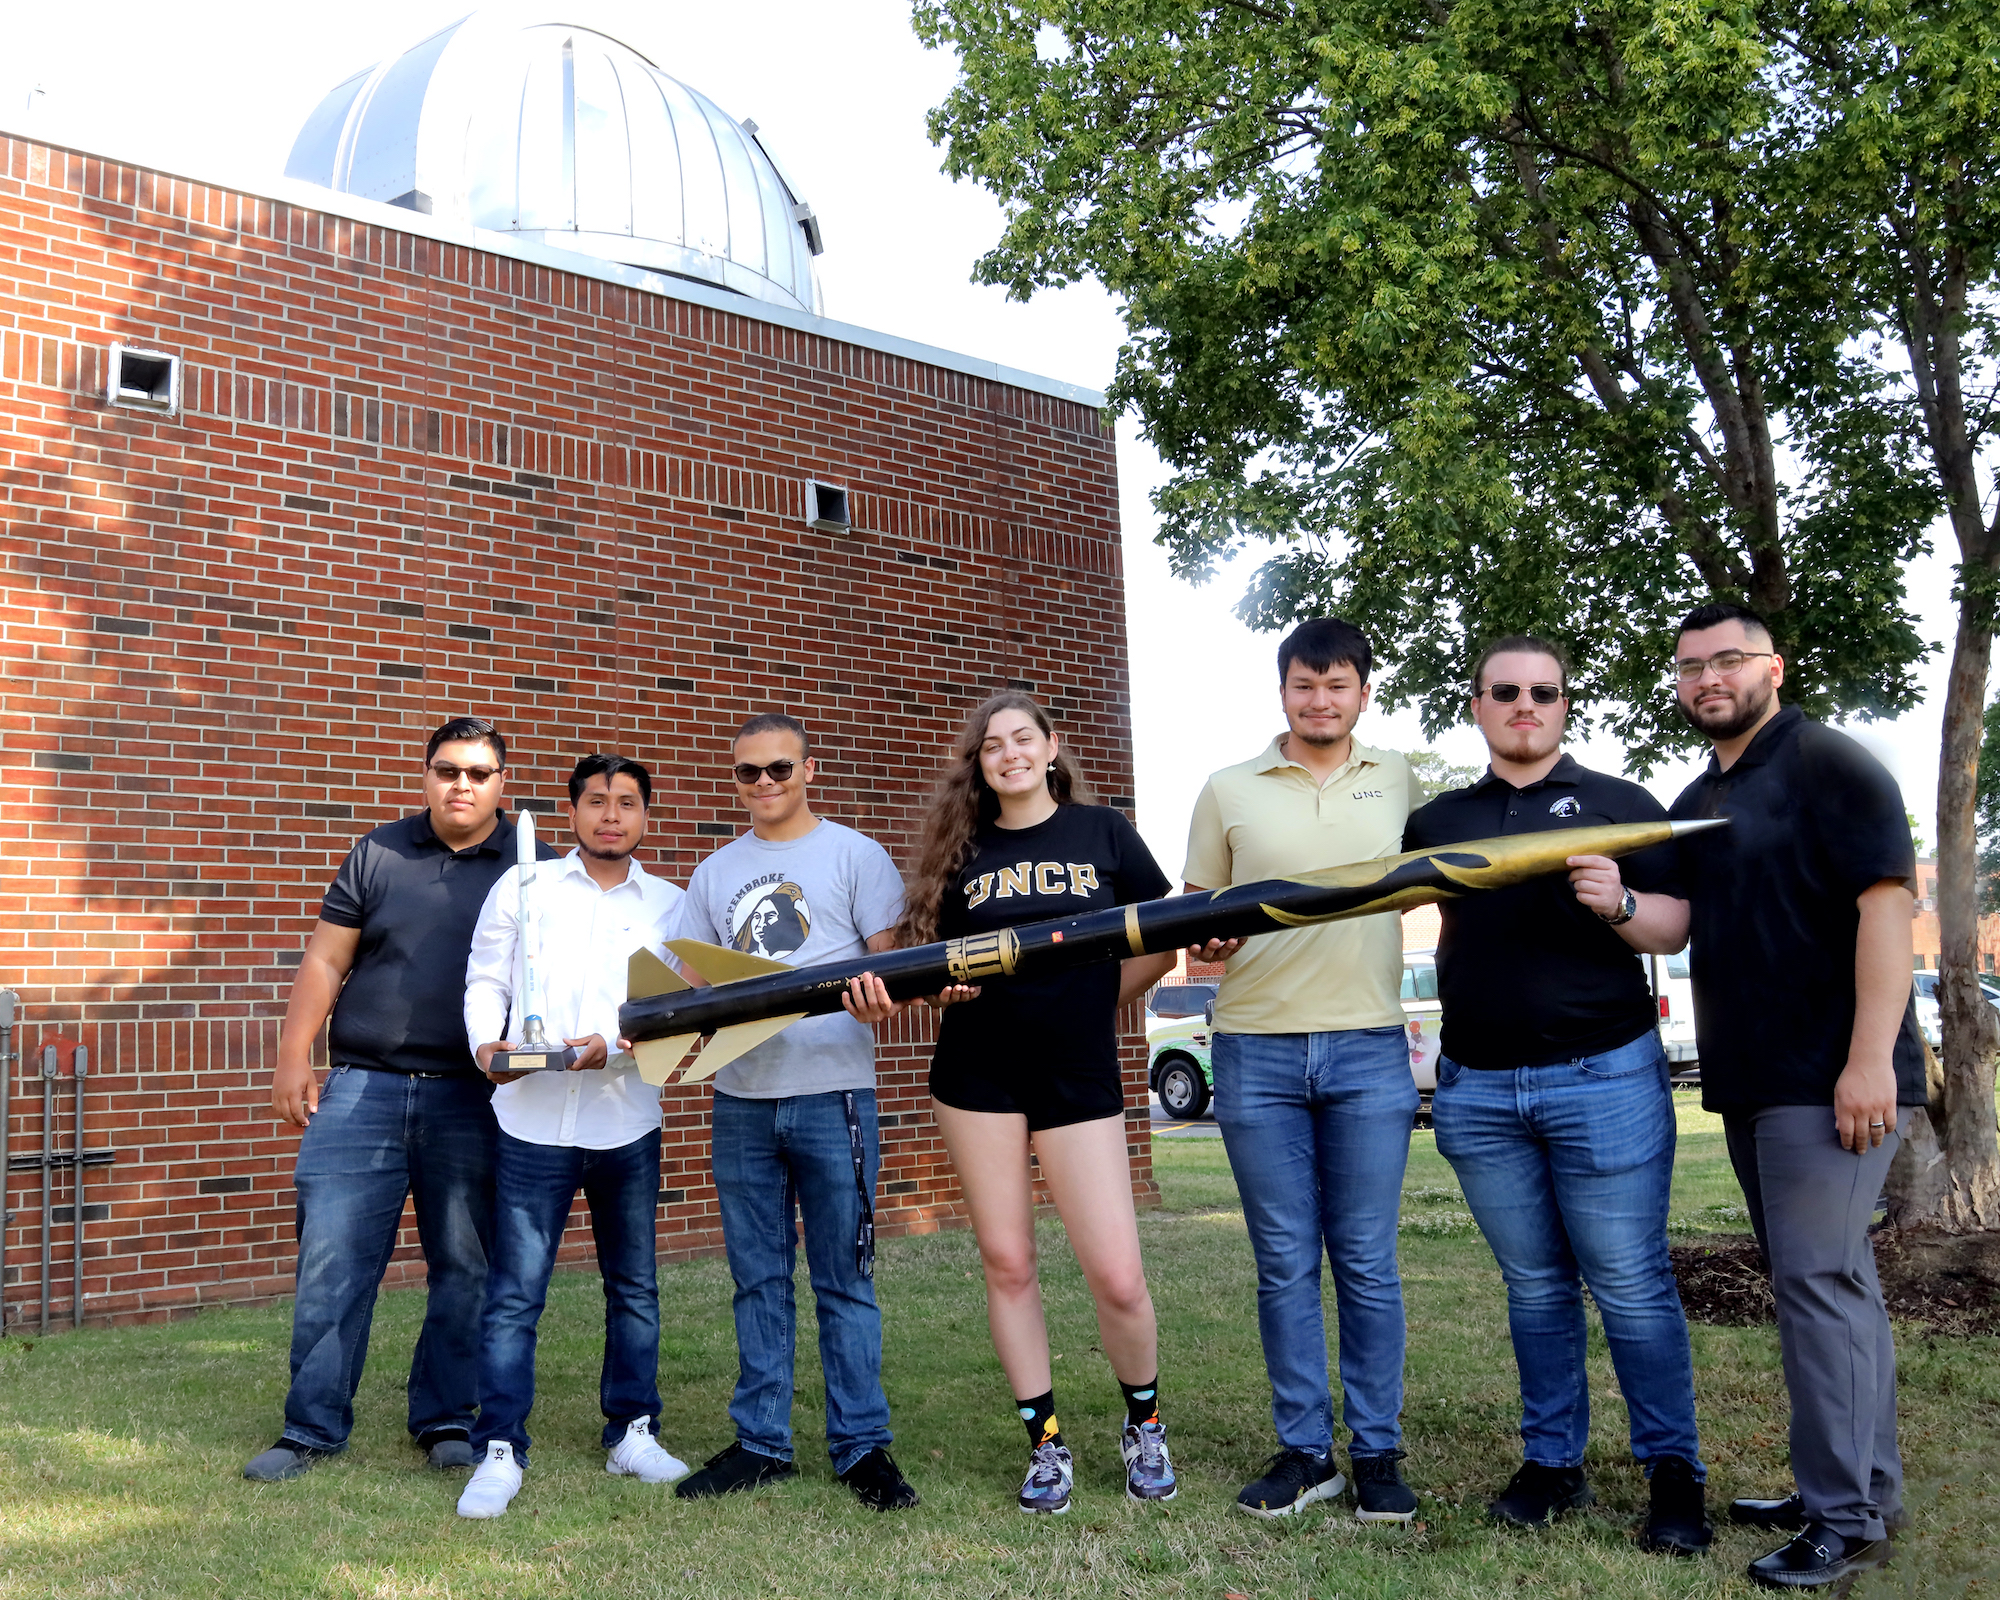 Six young adults are standing in front of a building and carrying a long rocket together.